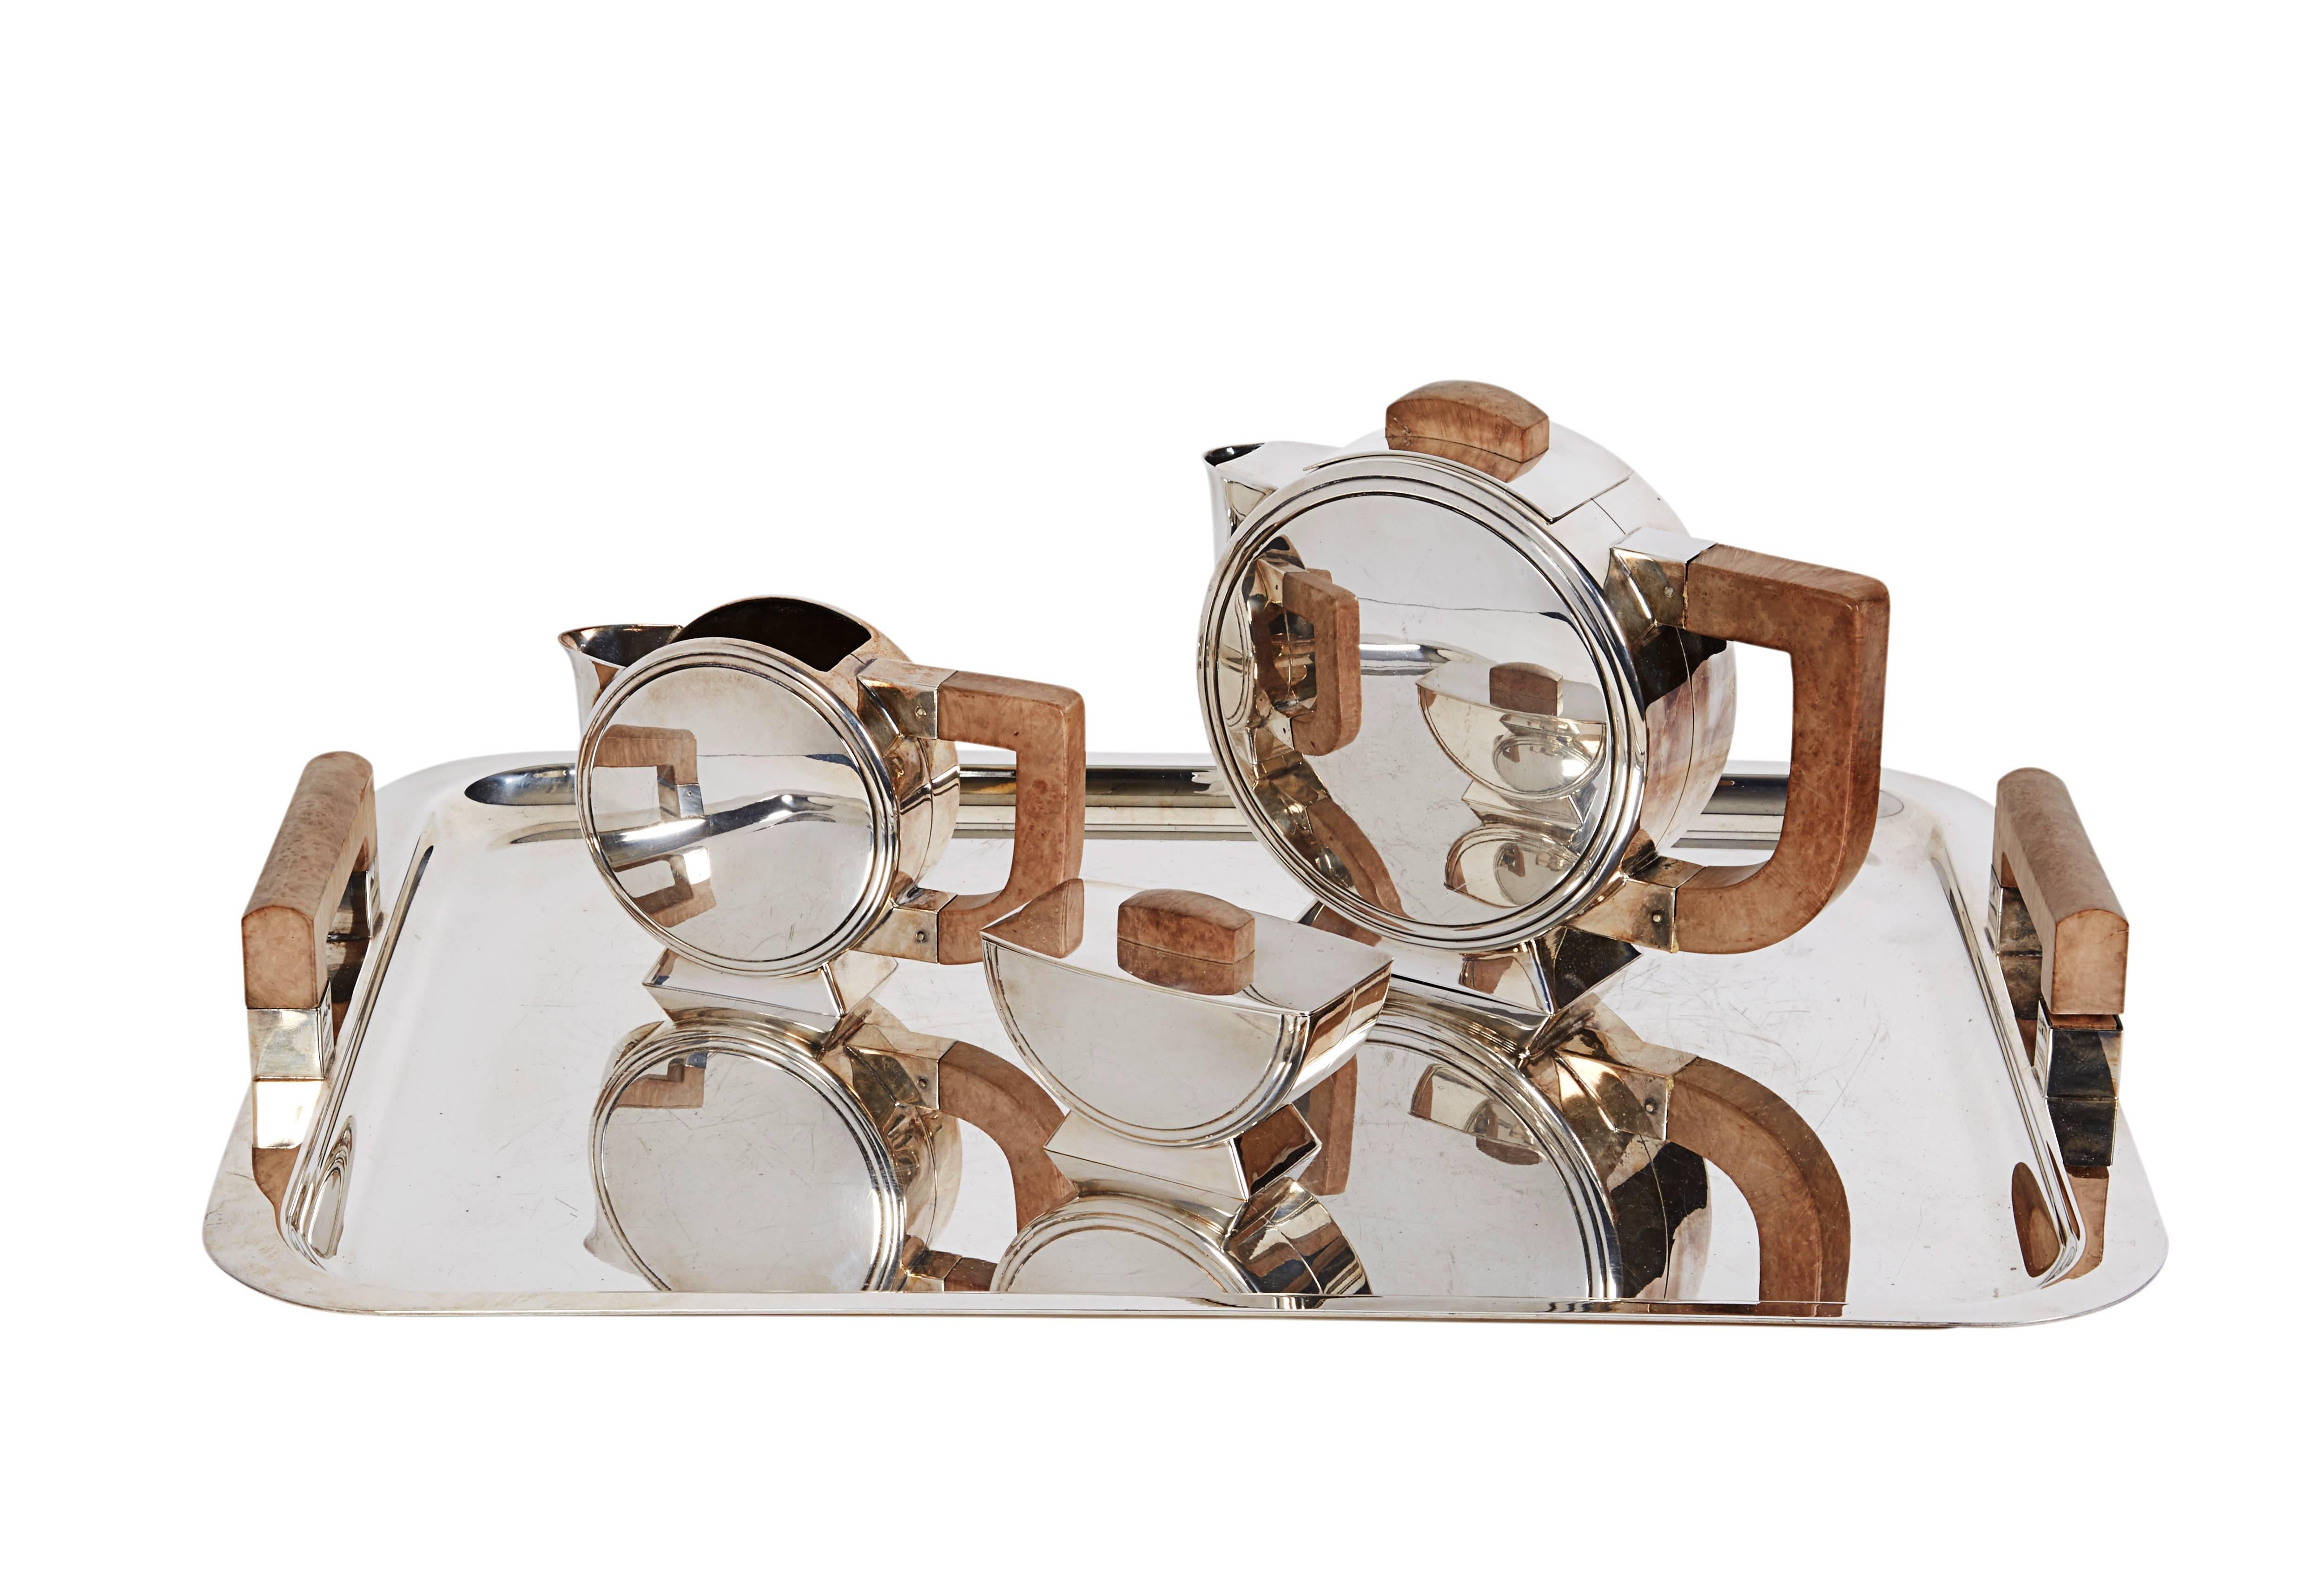 A French Art Deco silverplate and wood tea set Christofle, designed by Christian Fjerdingstad. 

Paris, circa 1920

Comprising a teapot, creamer, sugar and a two-handled serving tray.

Width of tray 19.5 inches

Good condition, normal